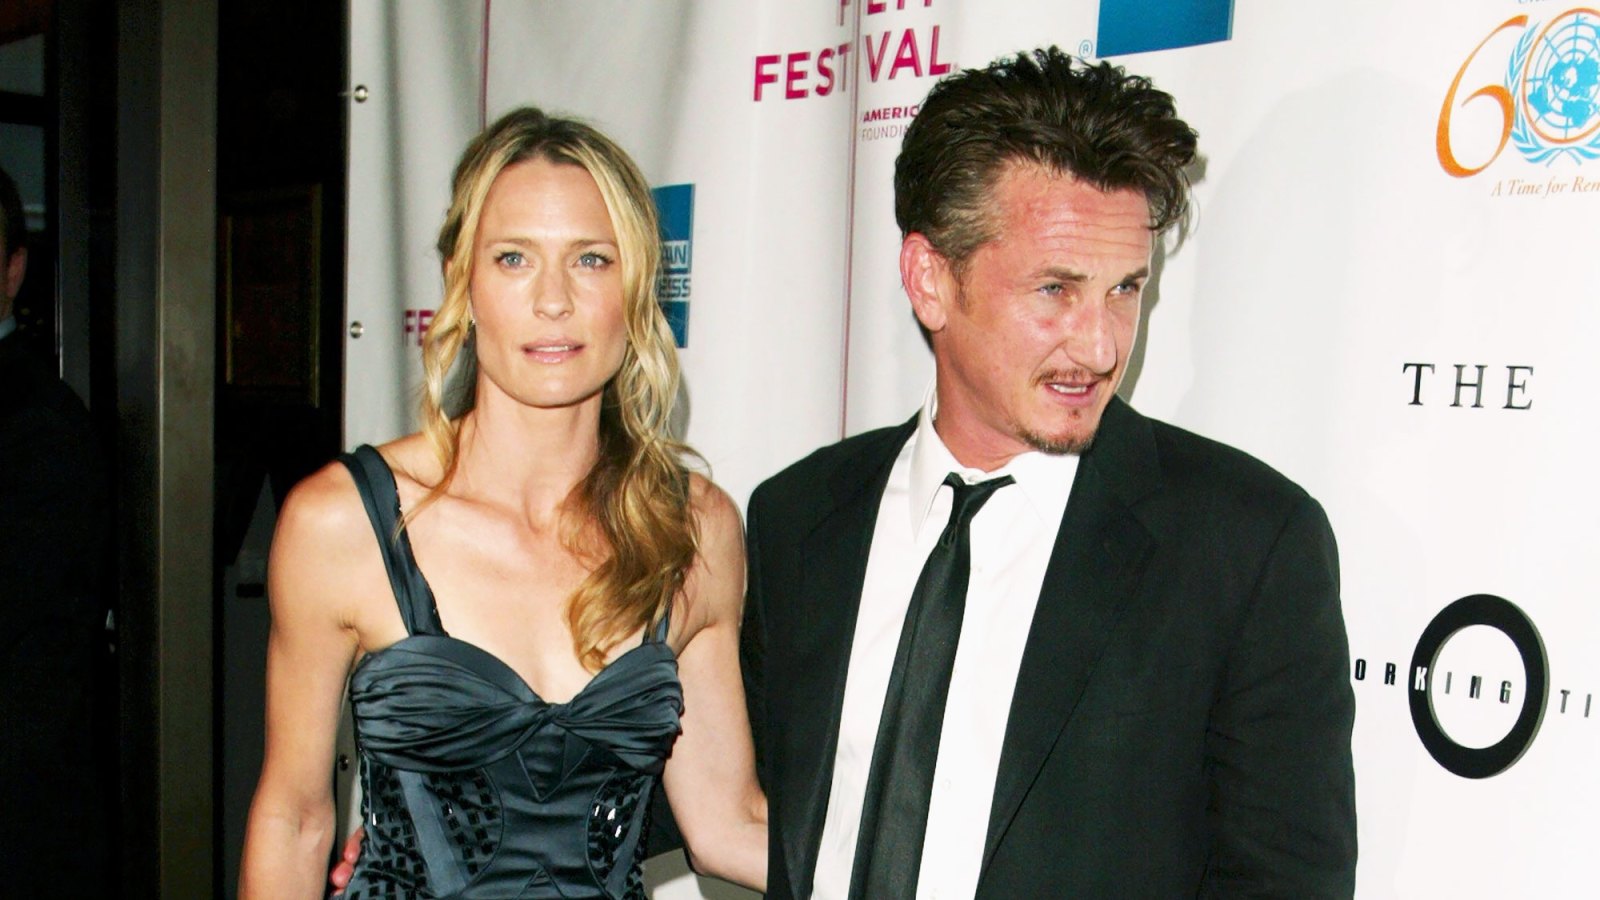 Sean-Penn-My-Marriage-to-Robin-Wright-Was-a-Fraud-Robin-Wright-Sean-Penn